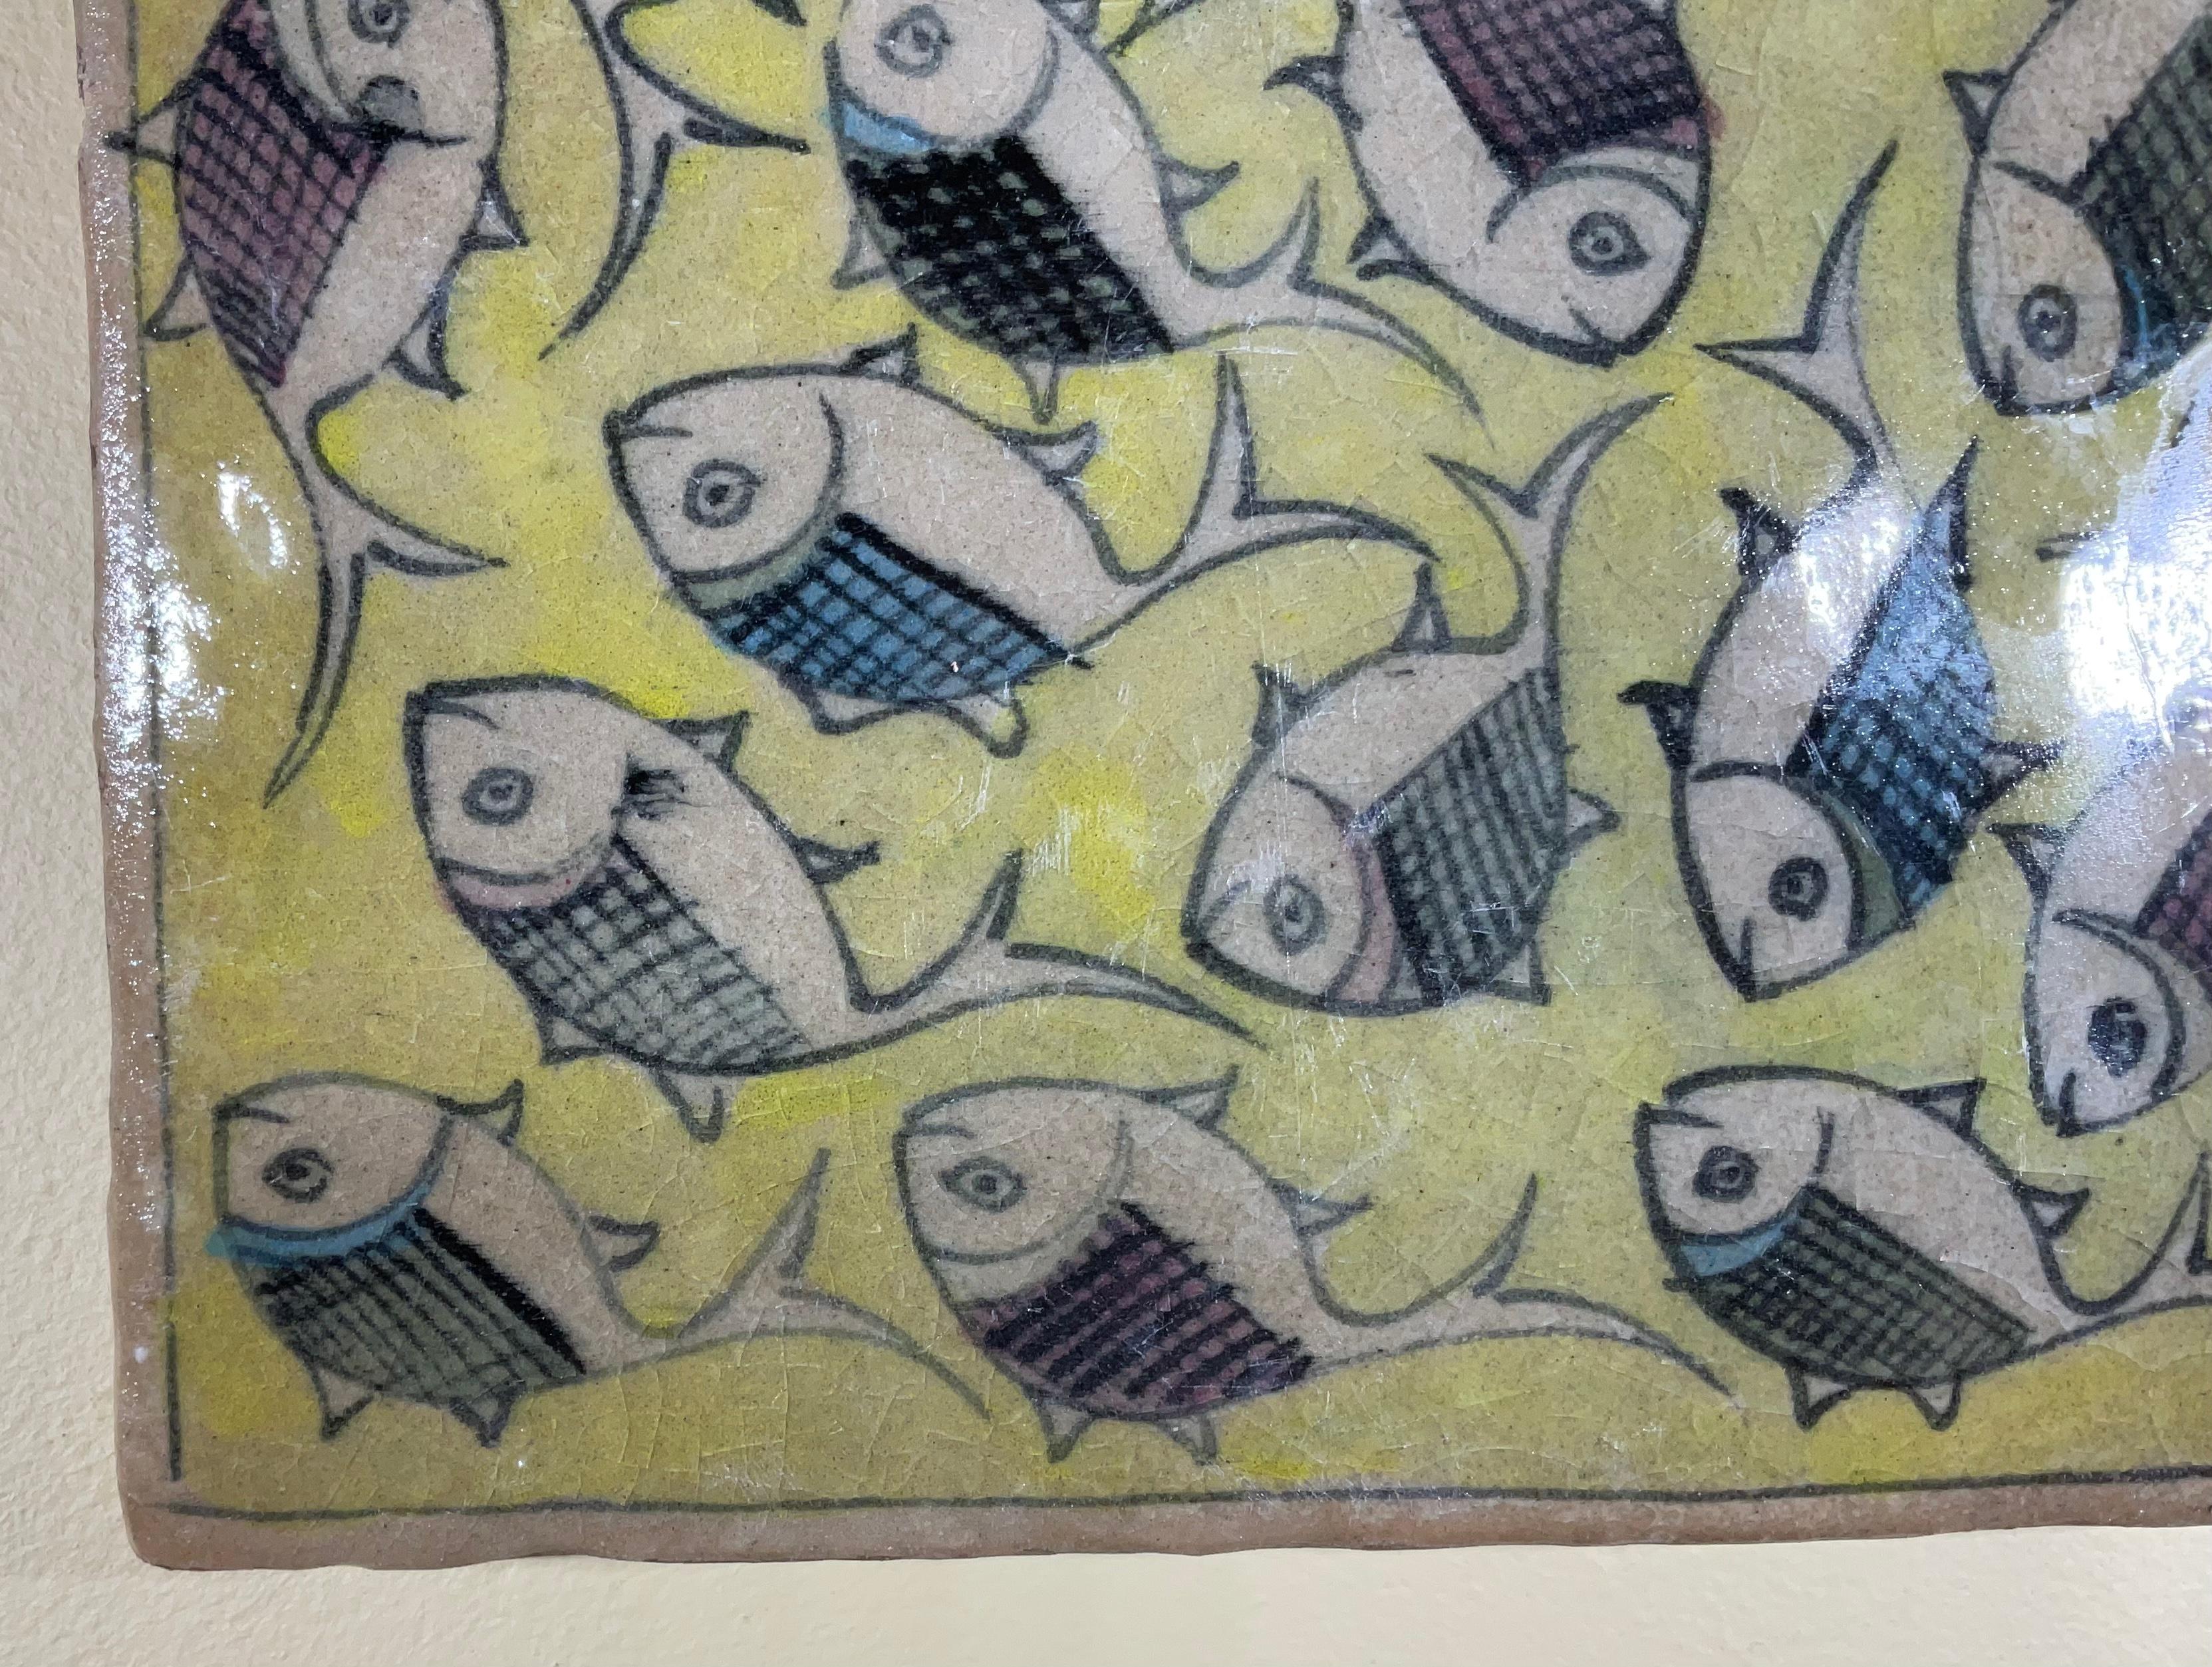 Vintage Ceramic Tile Wall Hanging In Good Condition For Sale In Delray Beach, FL